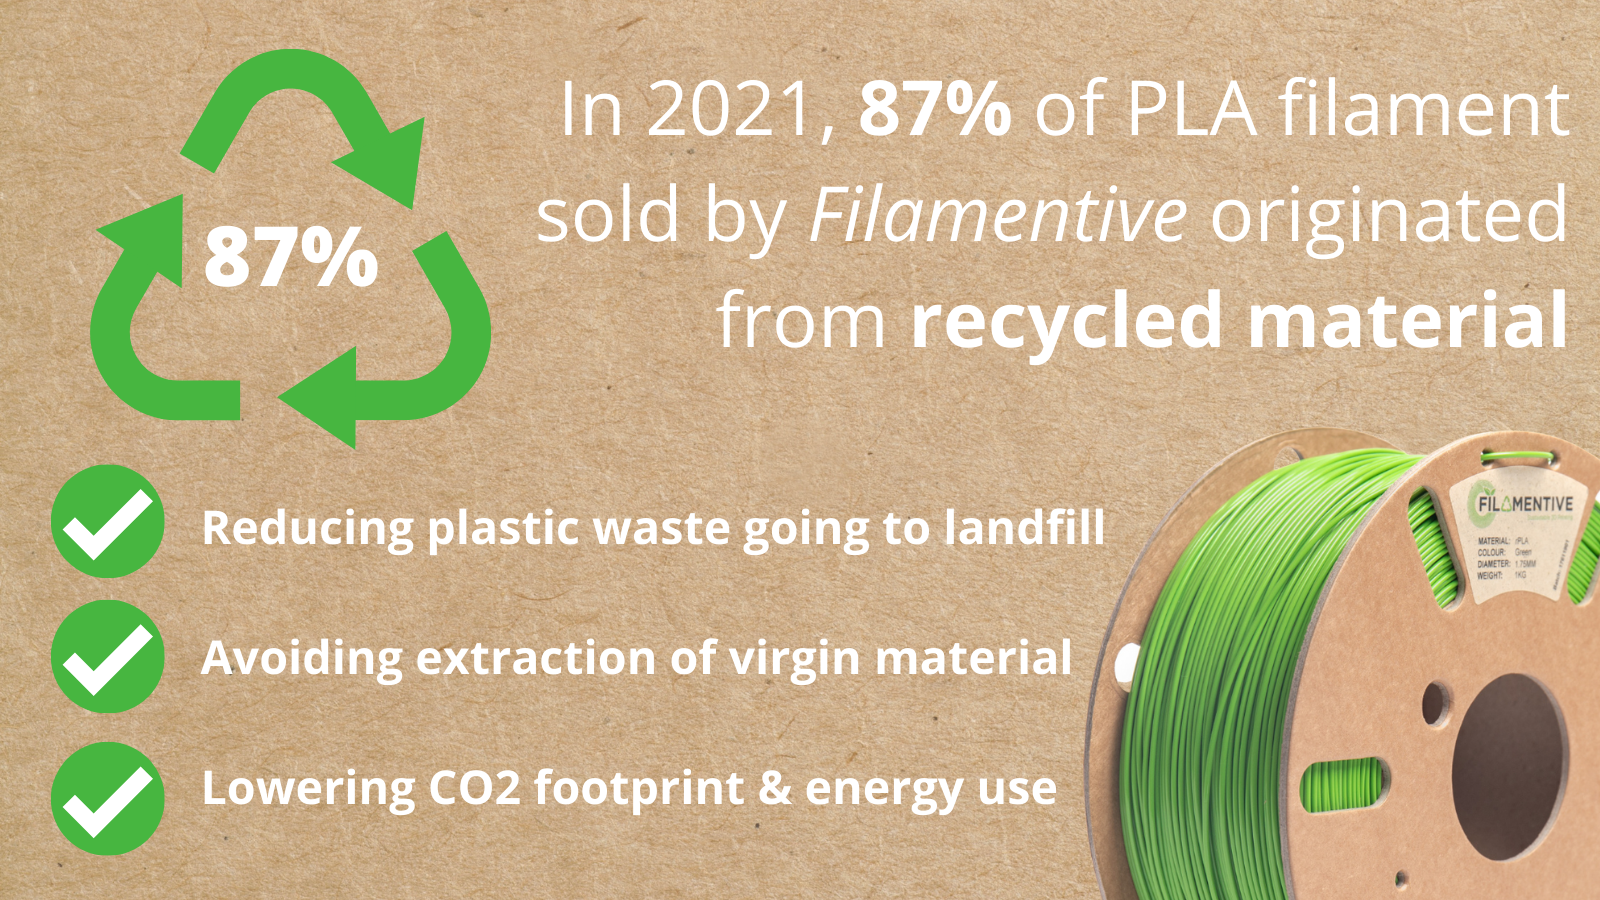 Filamentive's PLA filament line now contains 87 percent recycled material compared to 2020. Image via Filamentive.